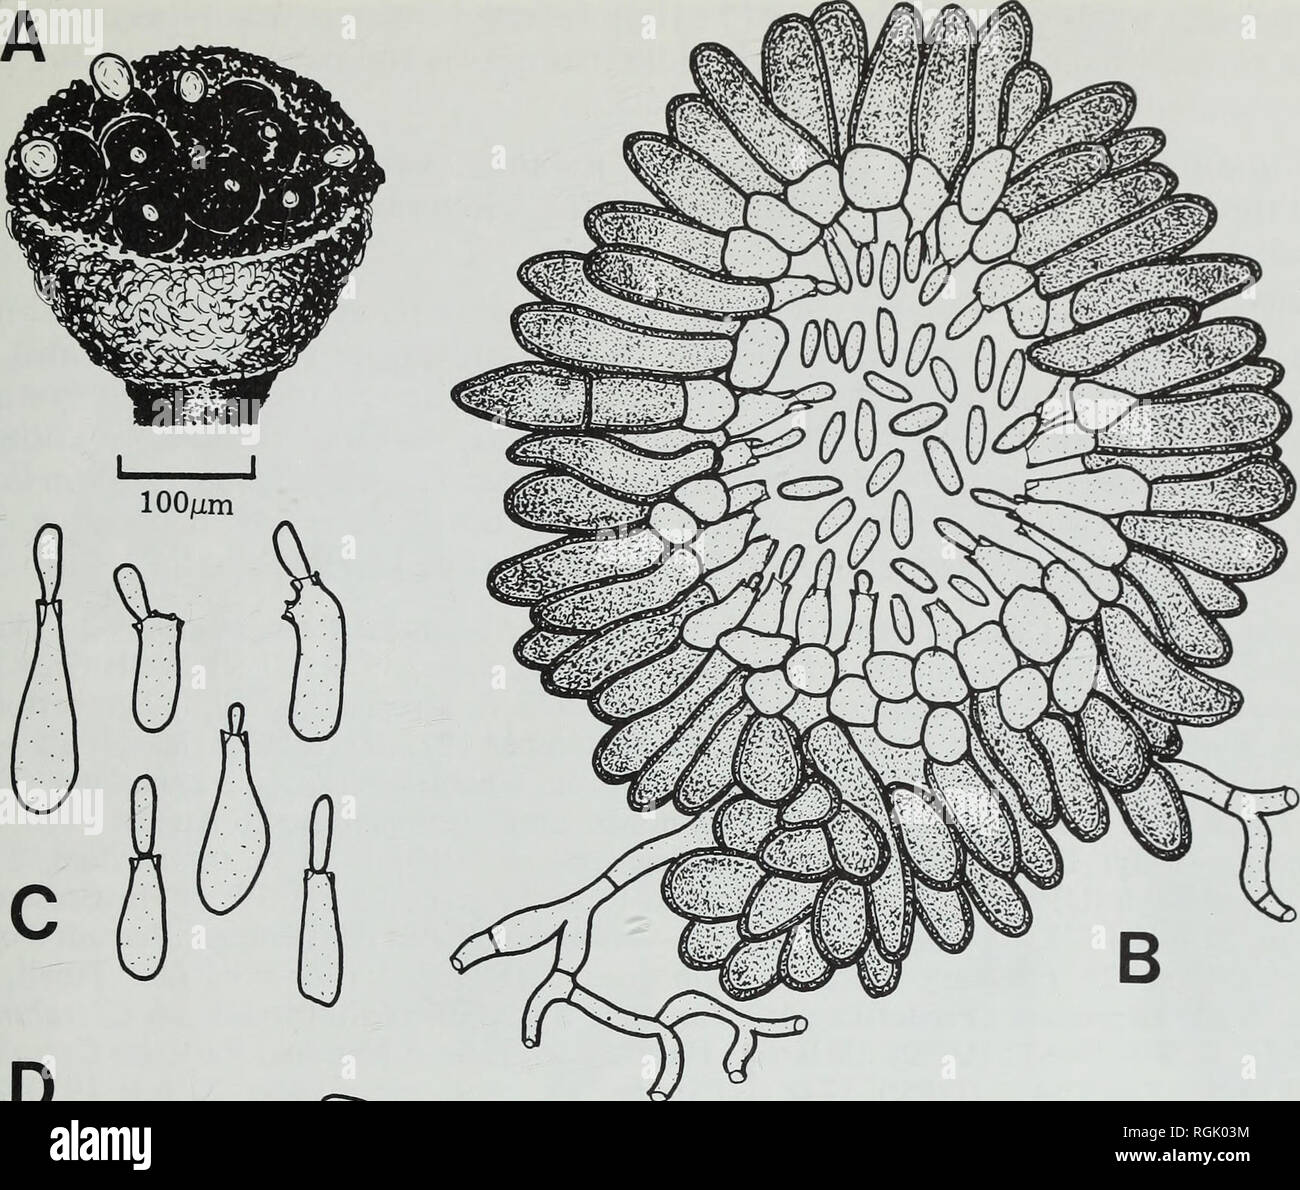 . Bulletin of the British Museum (Natural History). Botany; Botany. LICHENICOLOUS COELOMYCETES. D lOjLim Fig. 1 Asterophoma mazaediicola (herb. Hafellner—holotype). A, Infected mazaedium with pycnidia extruding conidia in mucilaginous drops. B, Vertical section of pycnidium. C, Conidiogenous cells. D, Conidia. attenuated and projecting slightly at the exterior to give the whole a star-like appearance, 5-8 x 2-4 //m, lined internally with smaller subhyaline to hyaline subglobose to polyhedral pseudoparenchymatous cells 1 -5-3*5 jum diam; mycelium ramifying through the mazae- dium, hyphae hyalin Stock Photo